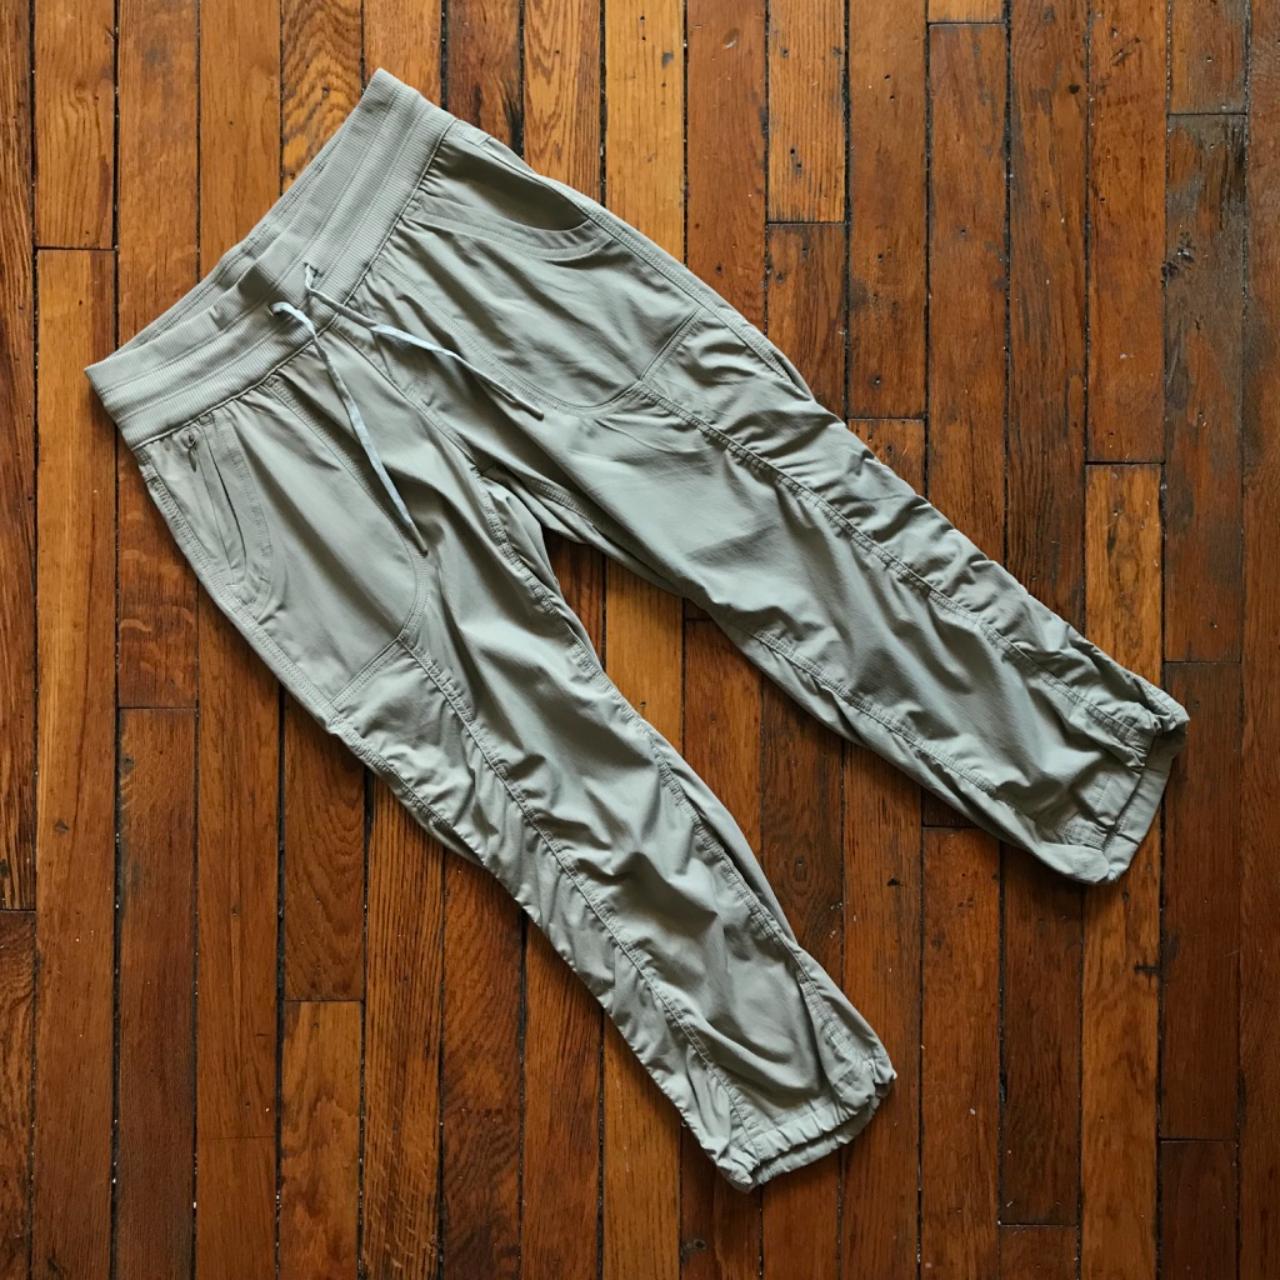 The North Face Tight jogger in Grey